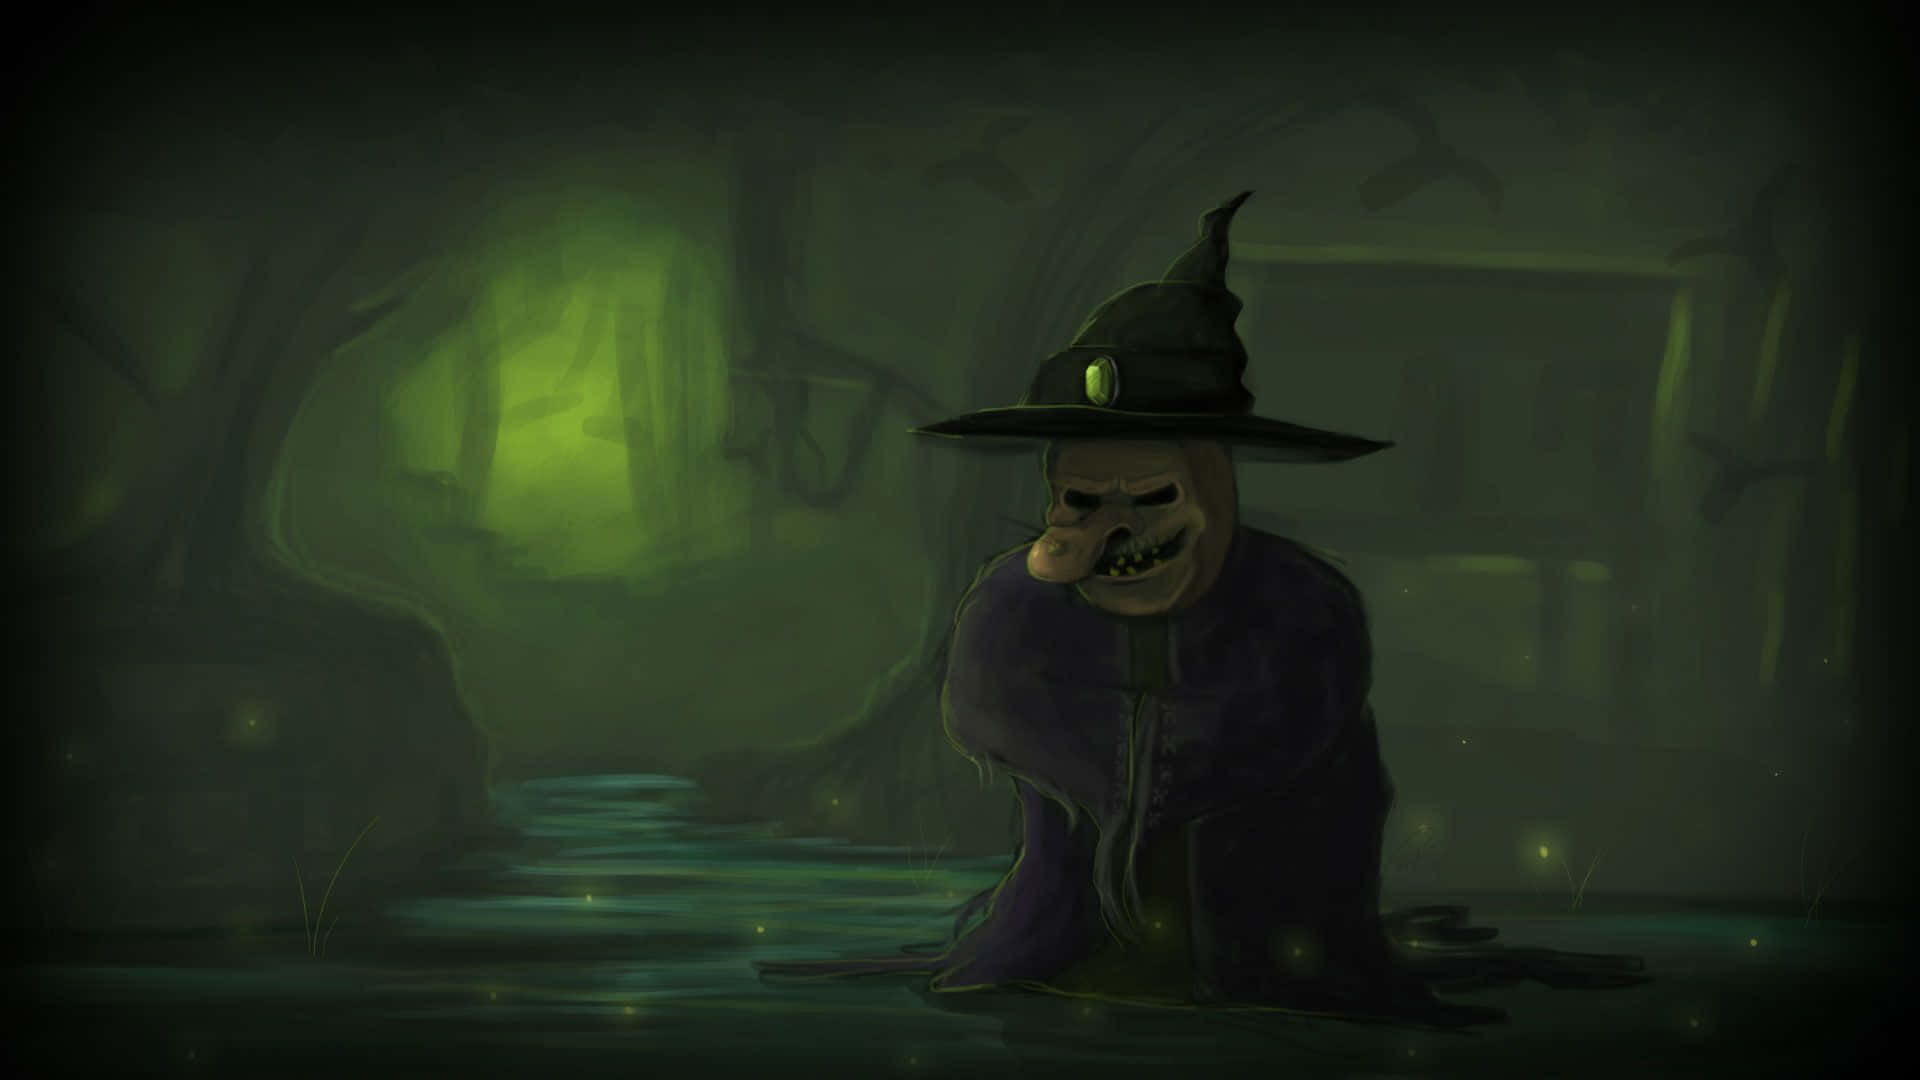 A Minecraft witch brewing potions in her spooky hut. Wallpaper